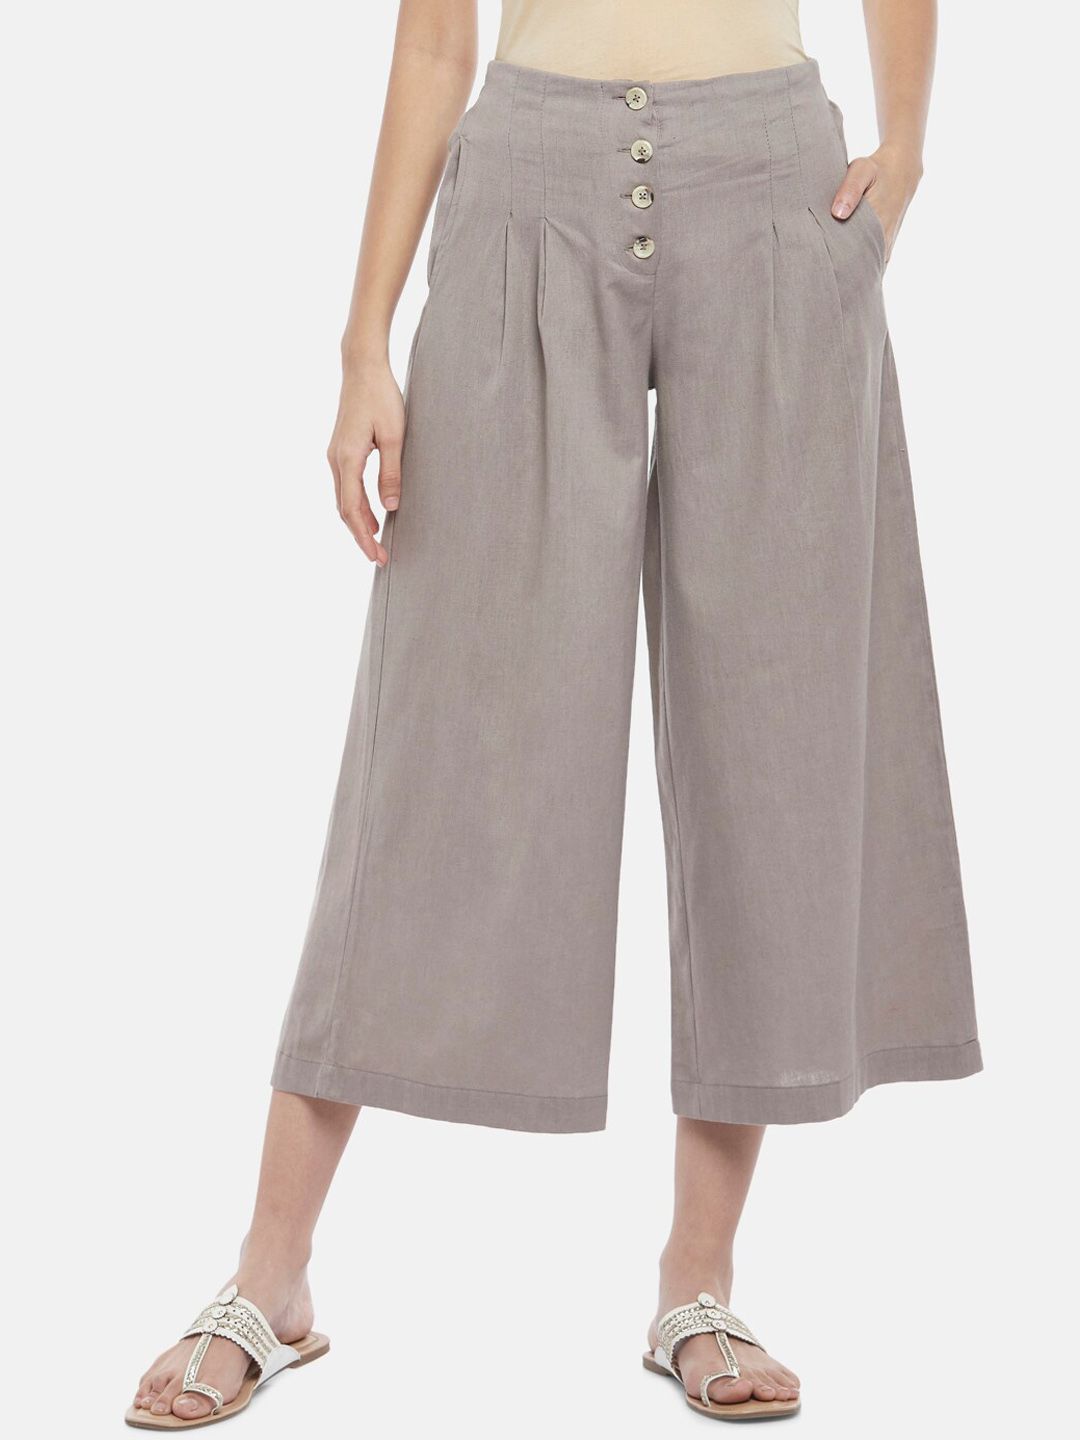 AKKRITI BY PANTALOONS Women Grey High-Rise Cotton Pleated Culottes Trousers Price in India